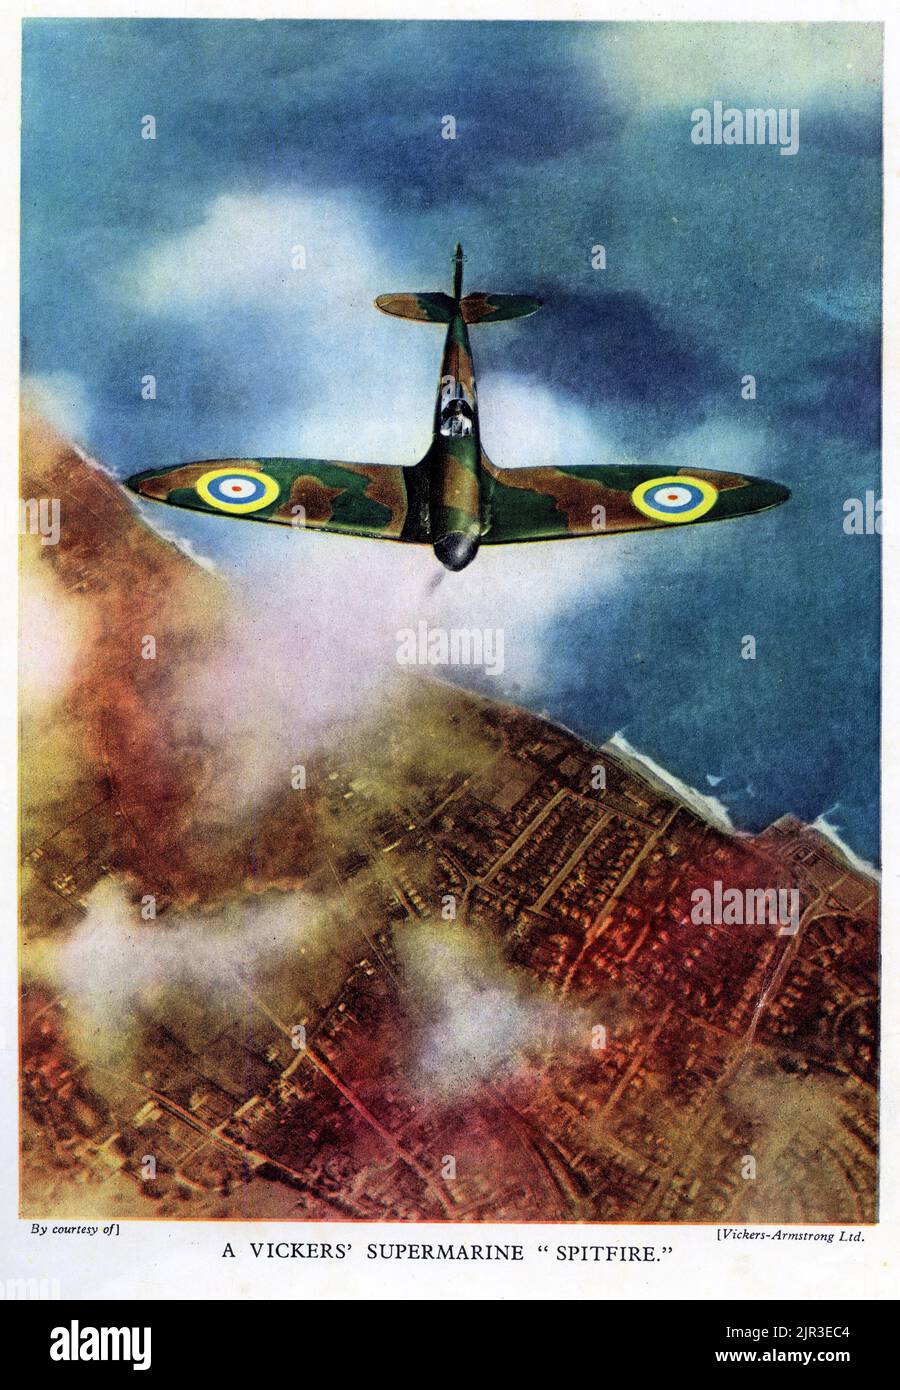 Halftone of a Vickers' Supermarine Spitfire during World War Two, published 1942. Stock Photo